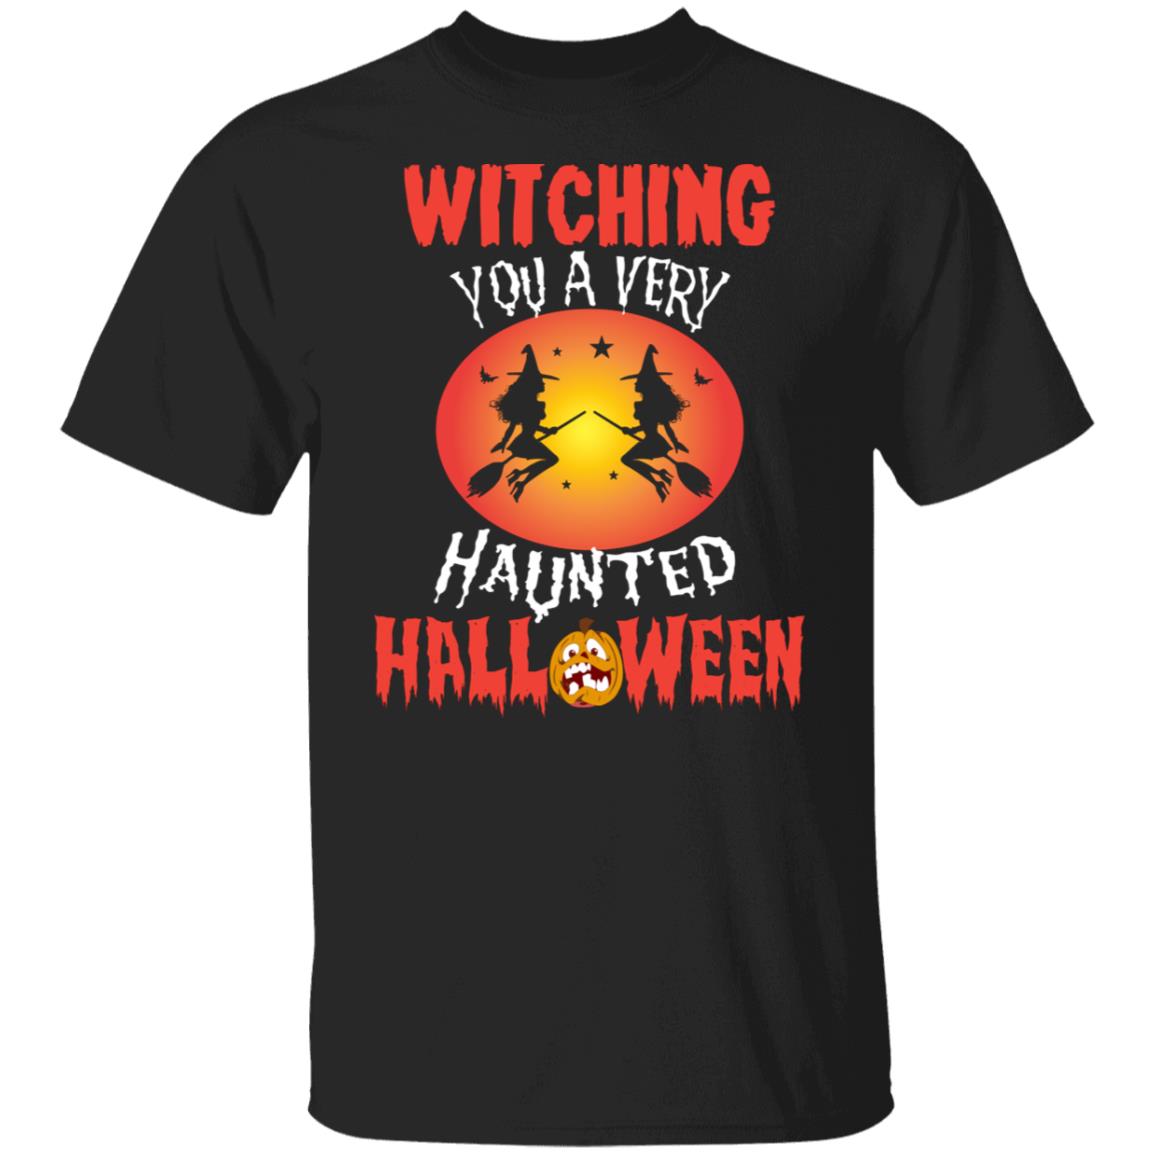 Witching You a Very Haunted Halloween Shirt